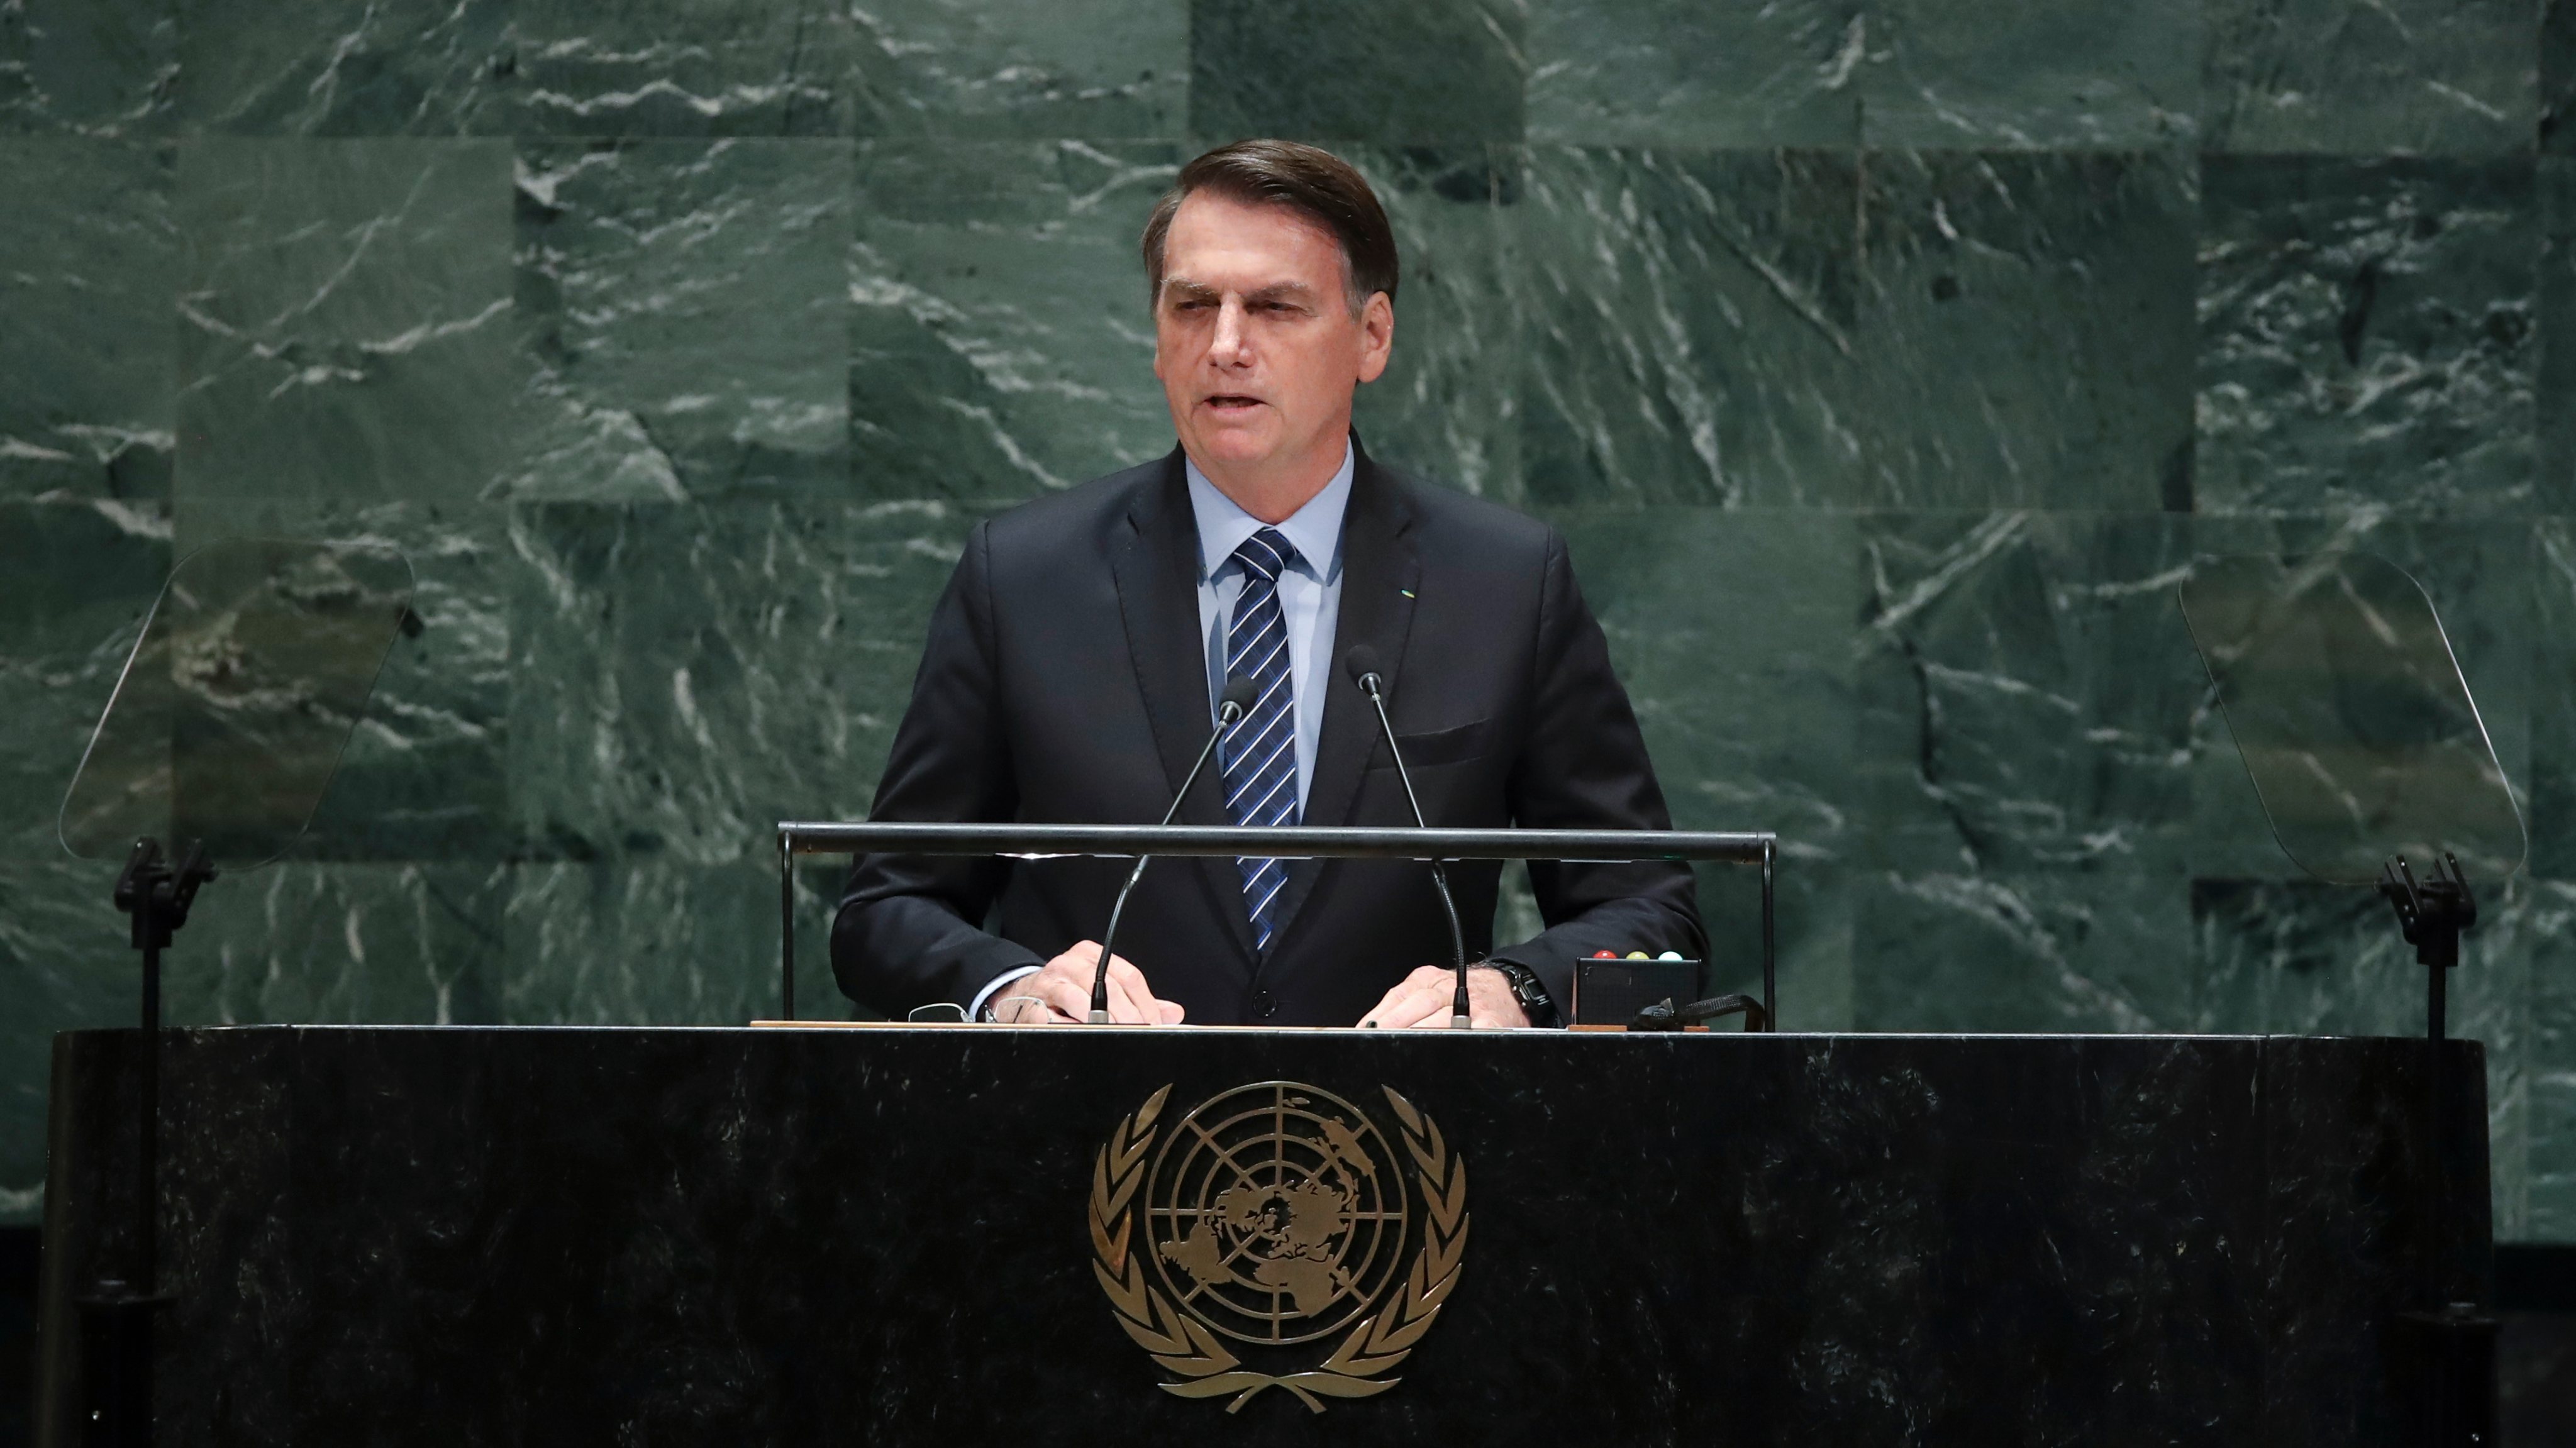 World Leaders Address United Nations General Assembly